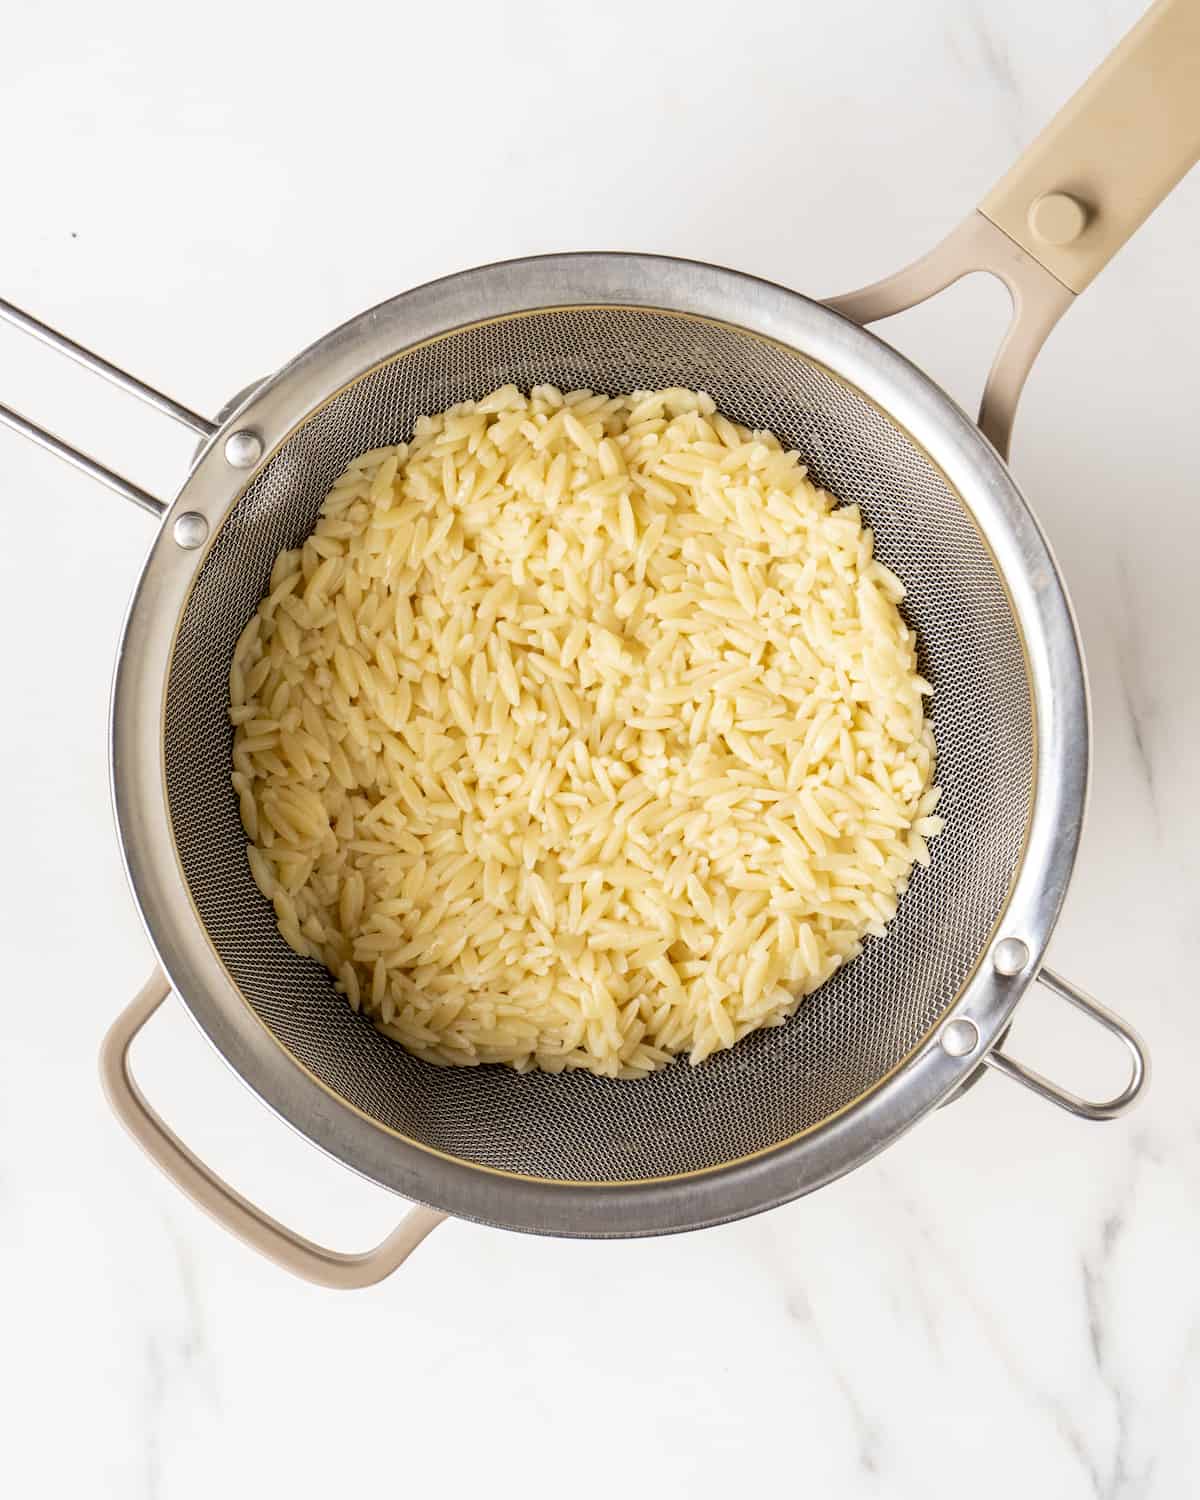 Cooked orzo in a strainer in a pot.